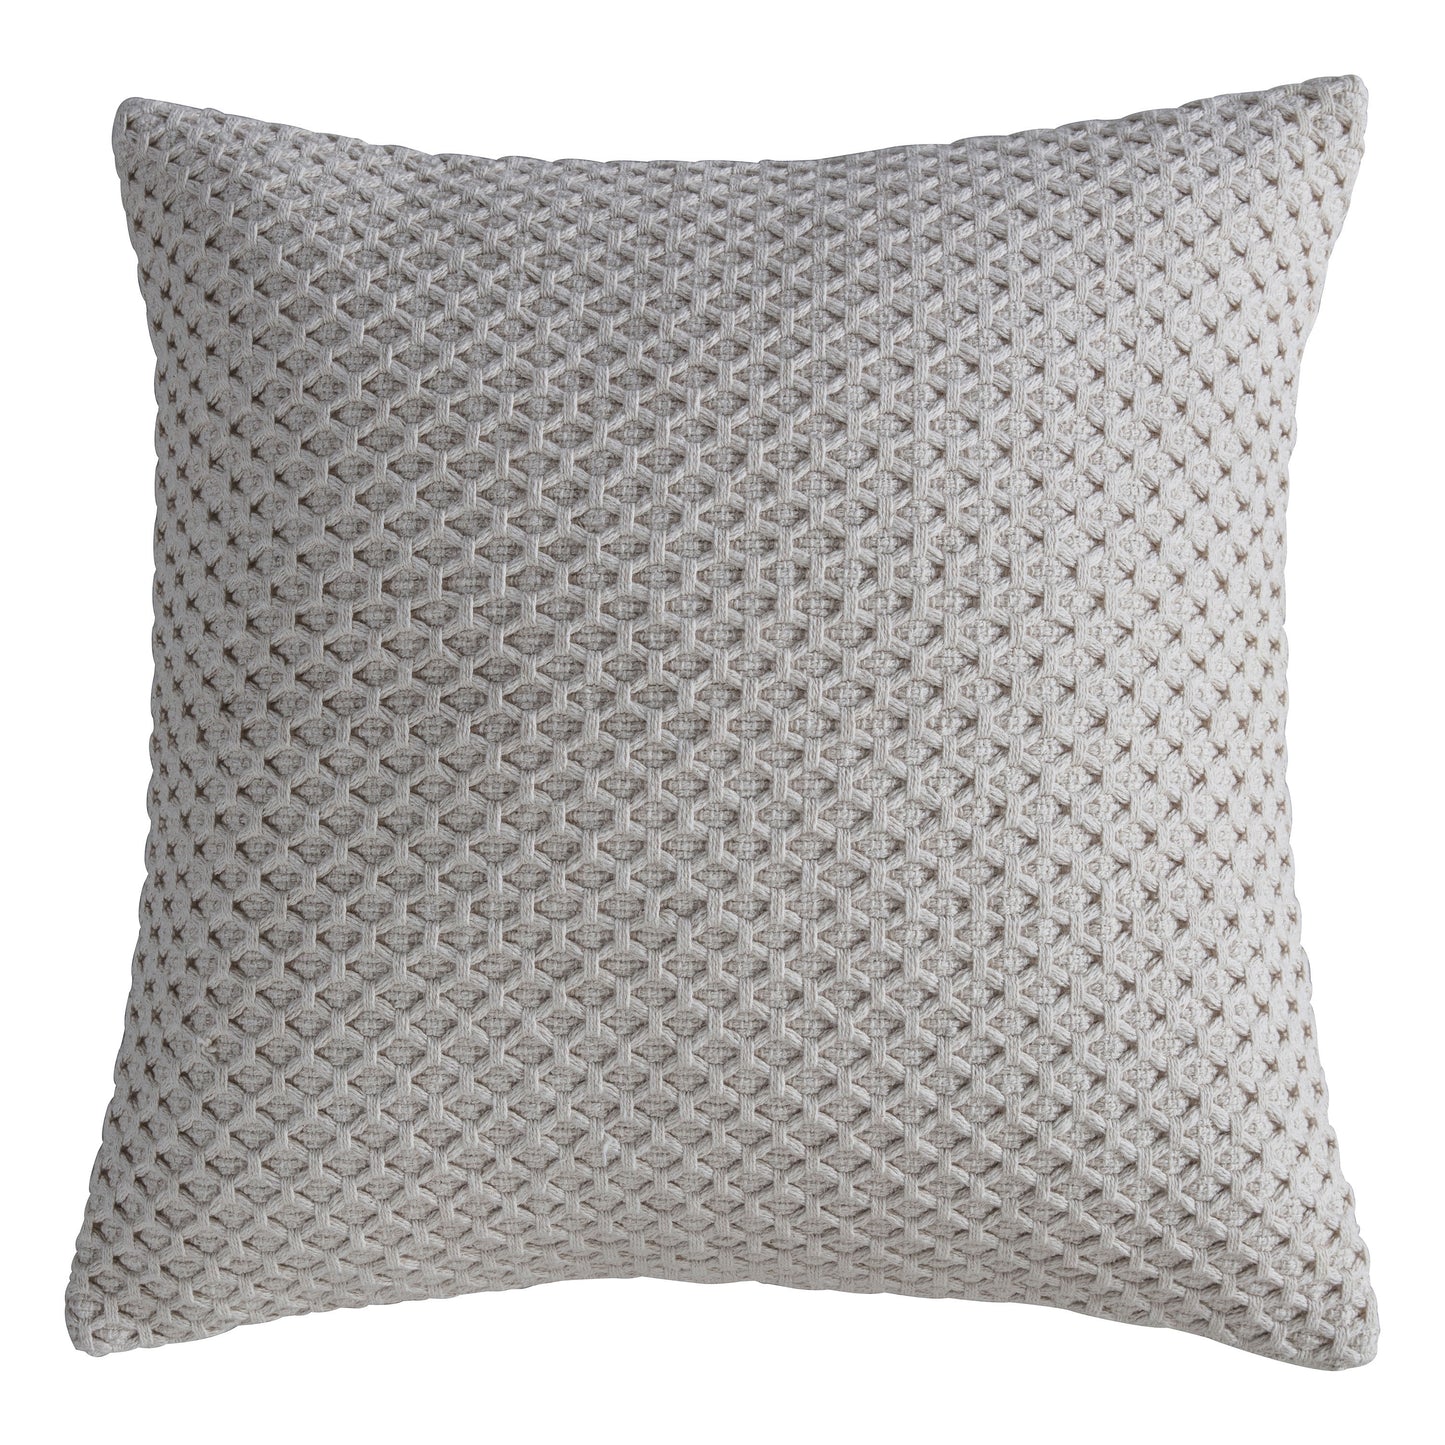 A Bittaford Cushion Natural with a diamond pattern for interior decor.